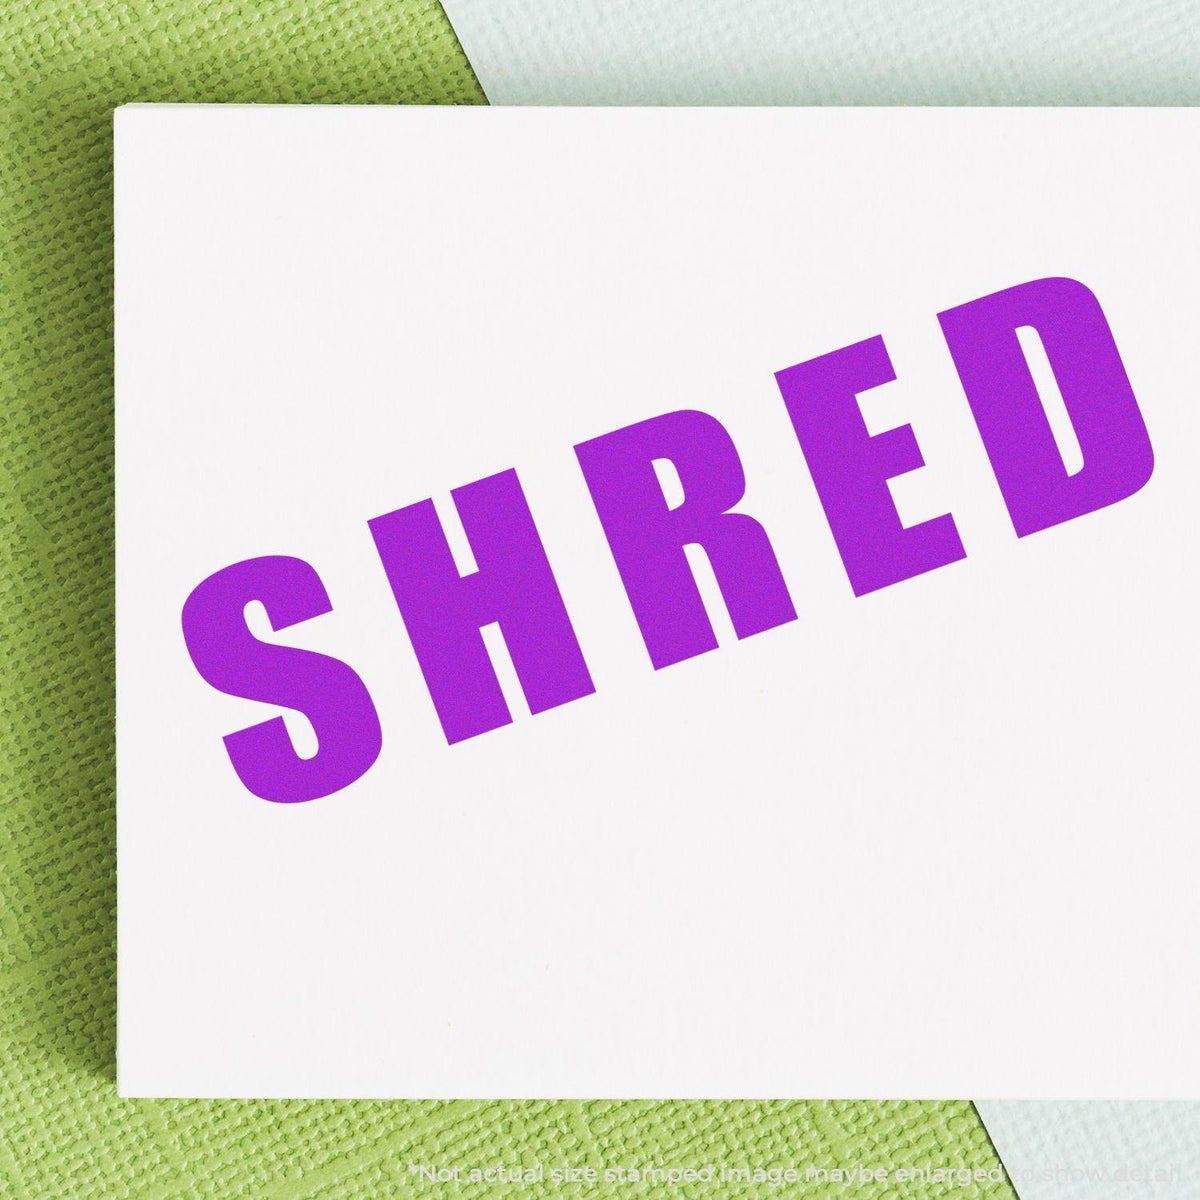 In Use Large Self-Inking Bold Shred Stamp Image